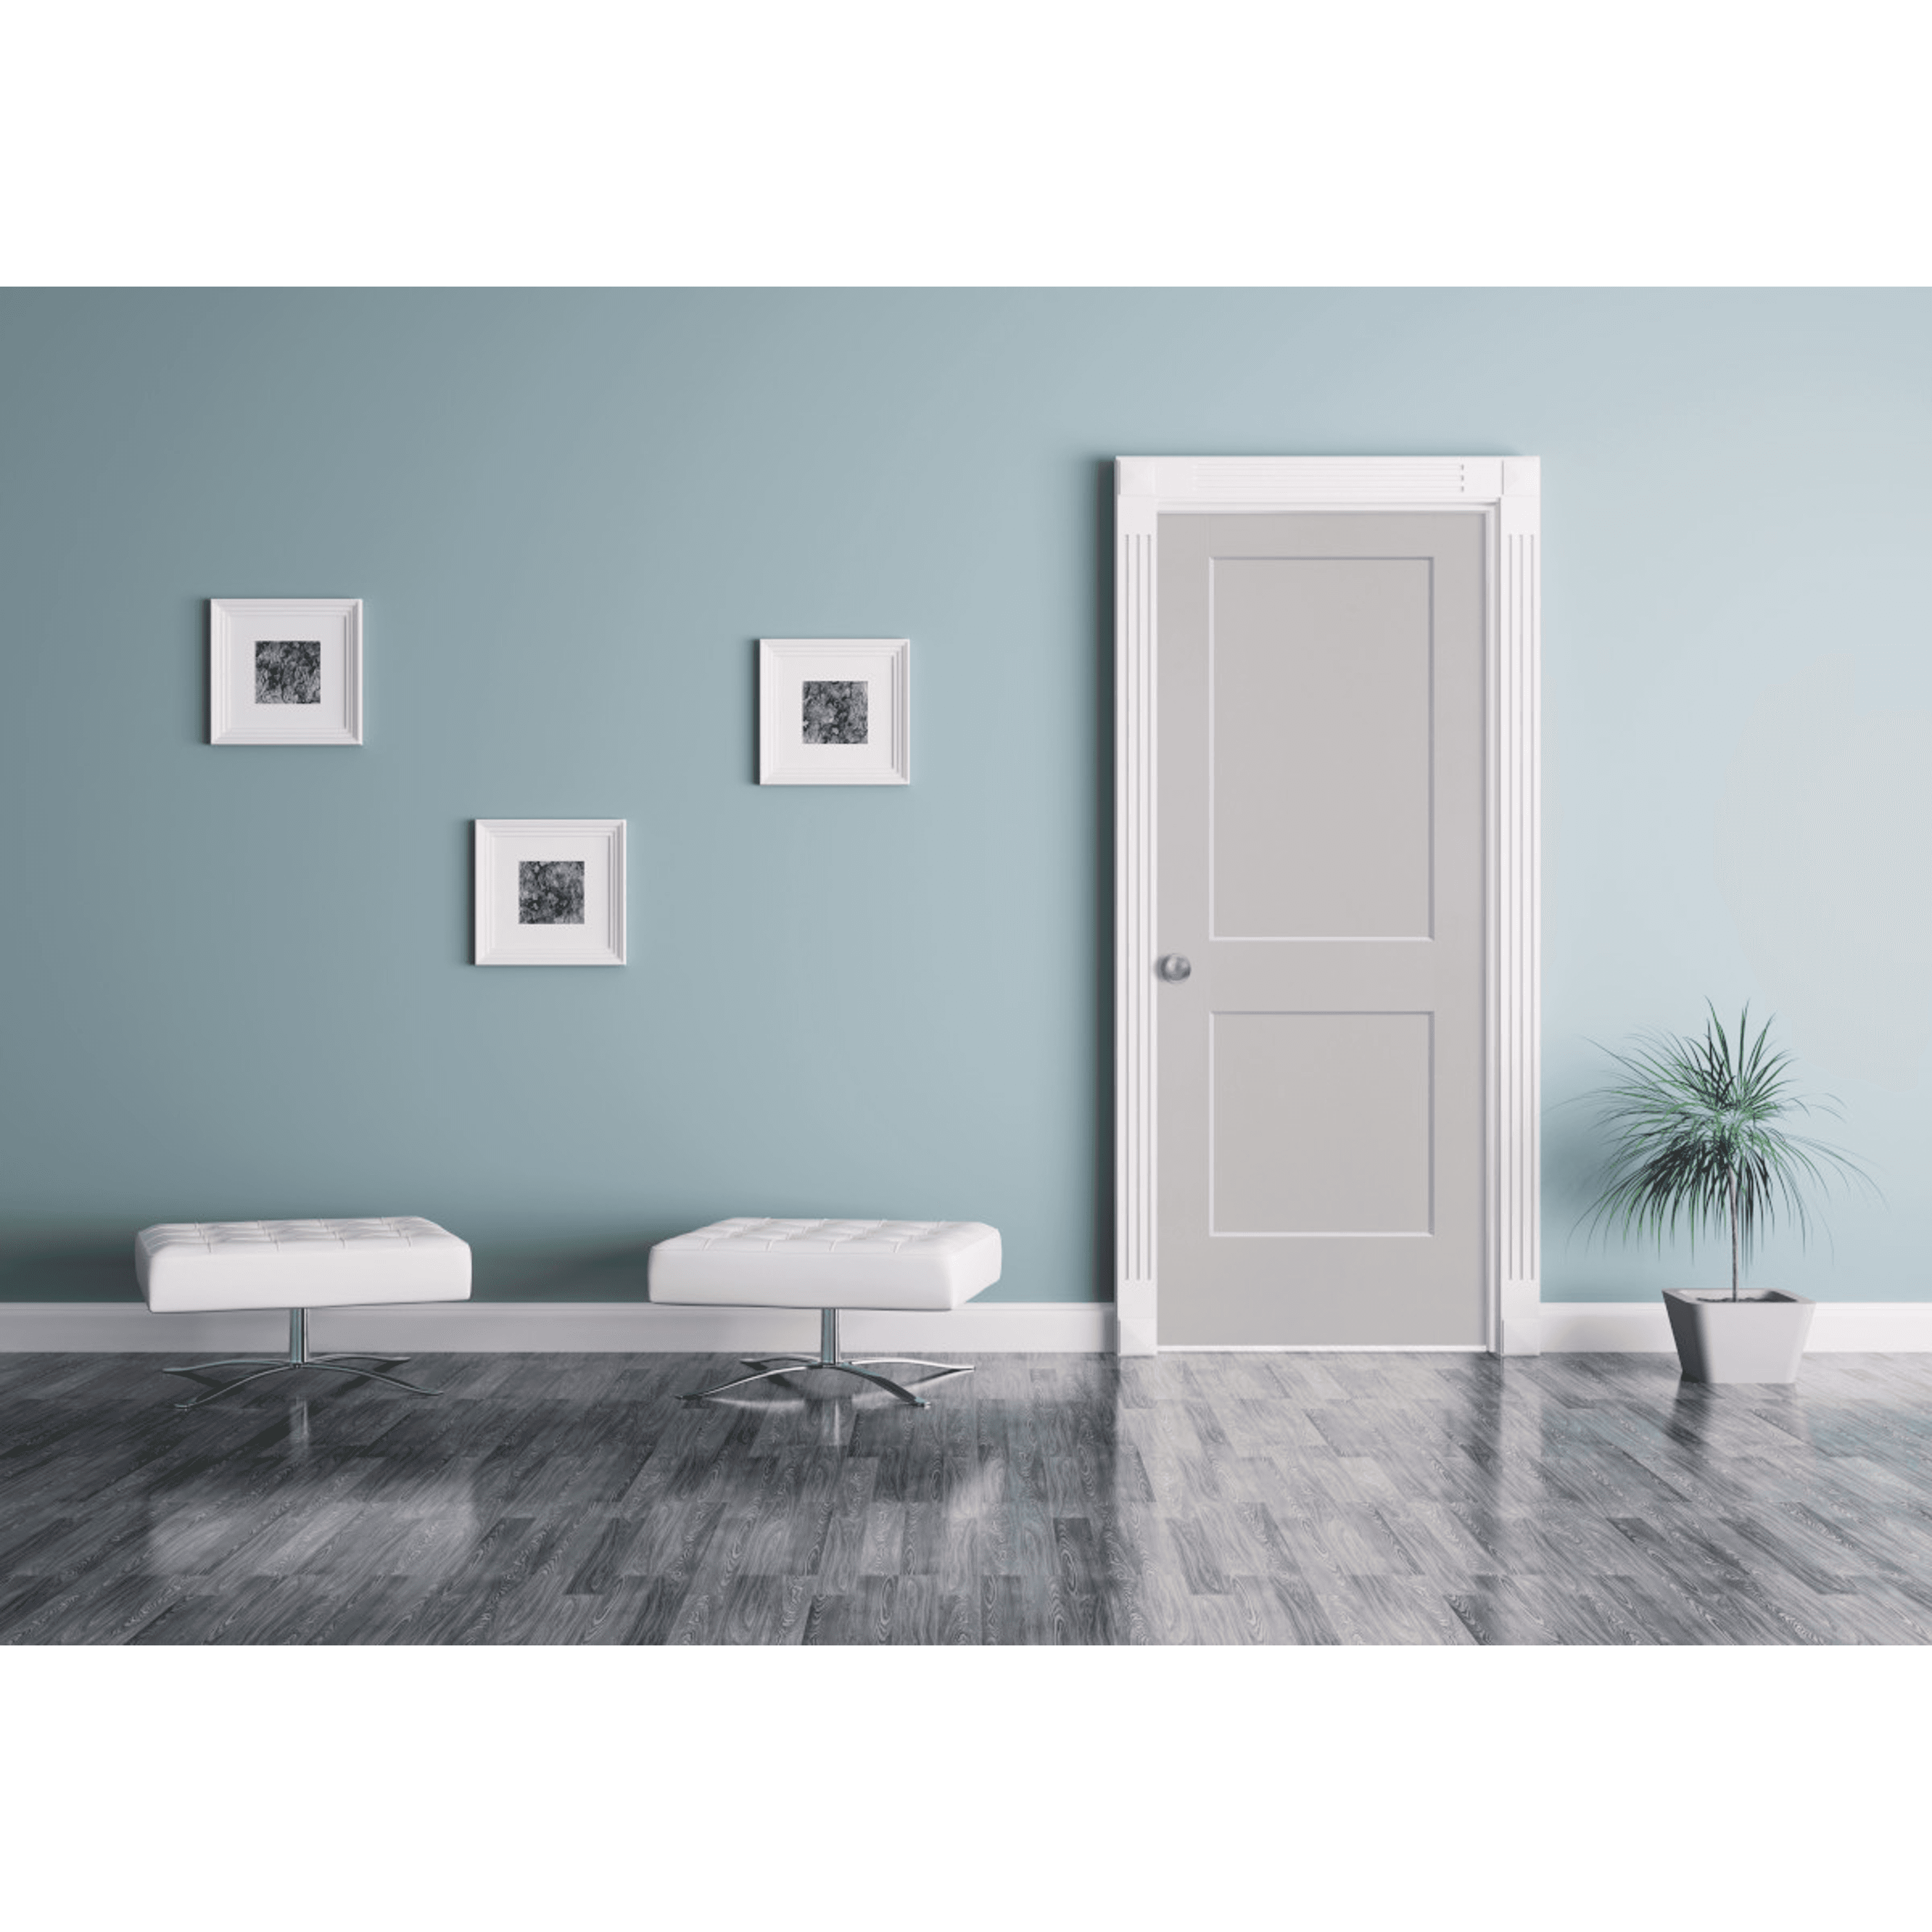 MPS-L-BlueWall-Gray-Moulded Panel Door.jpg